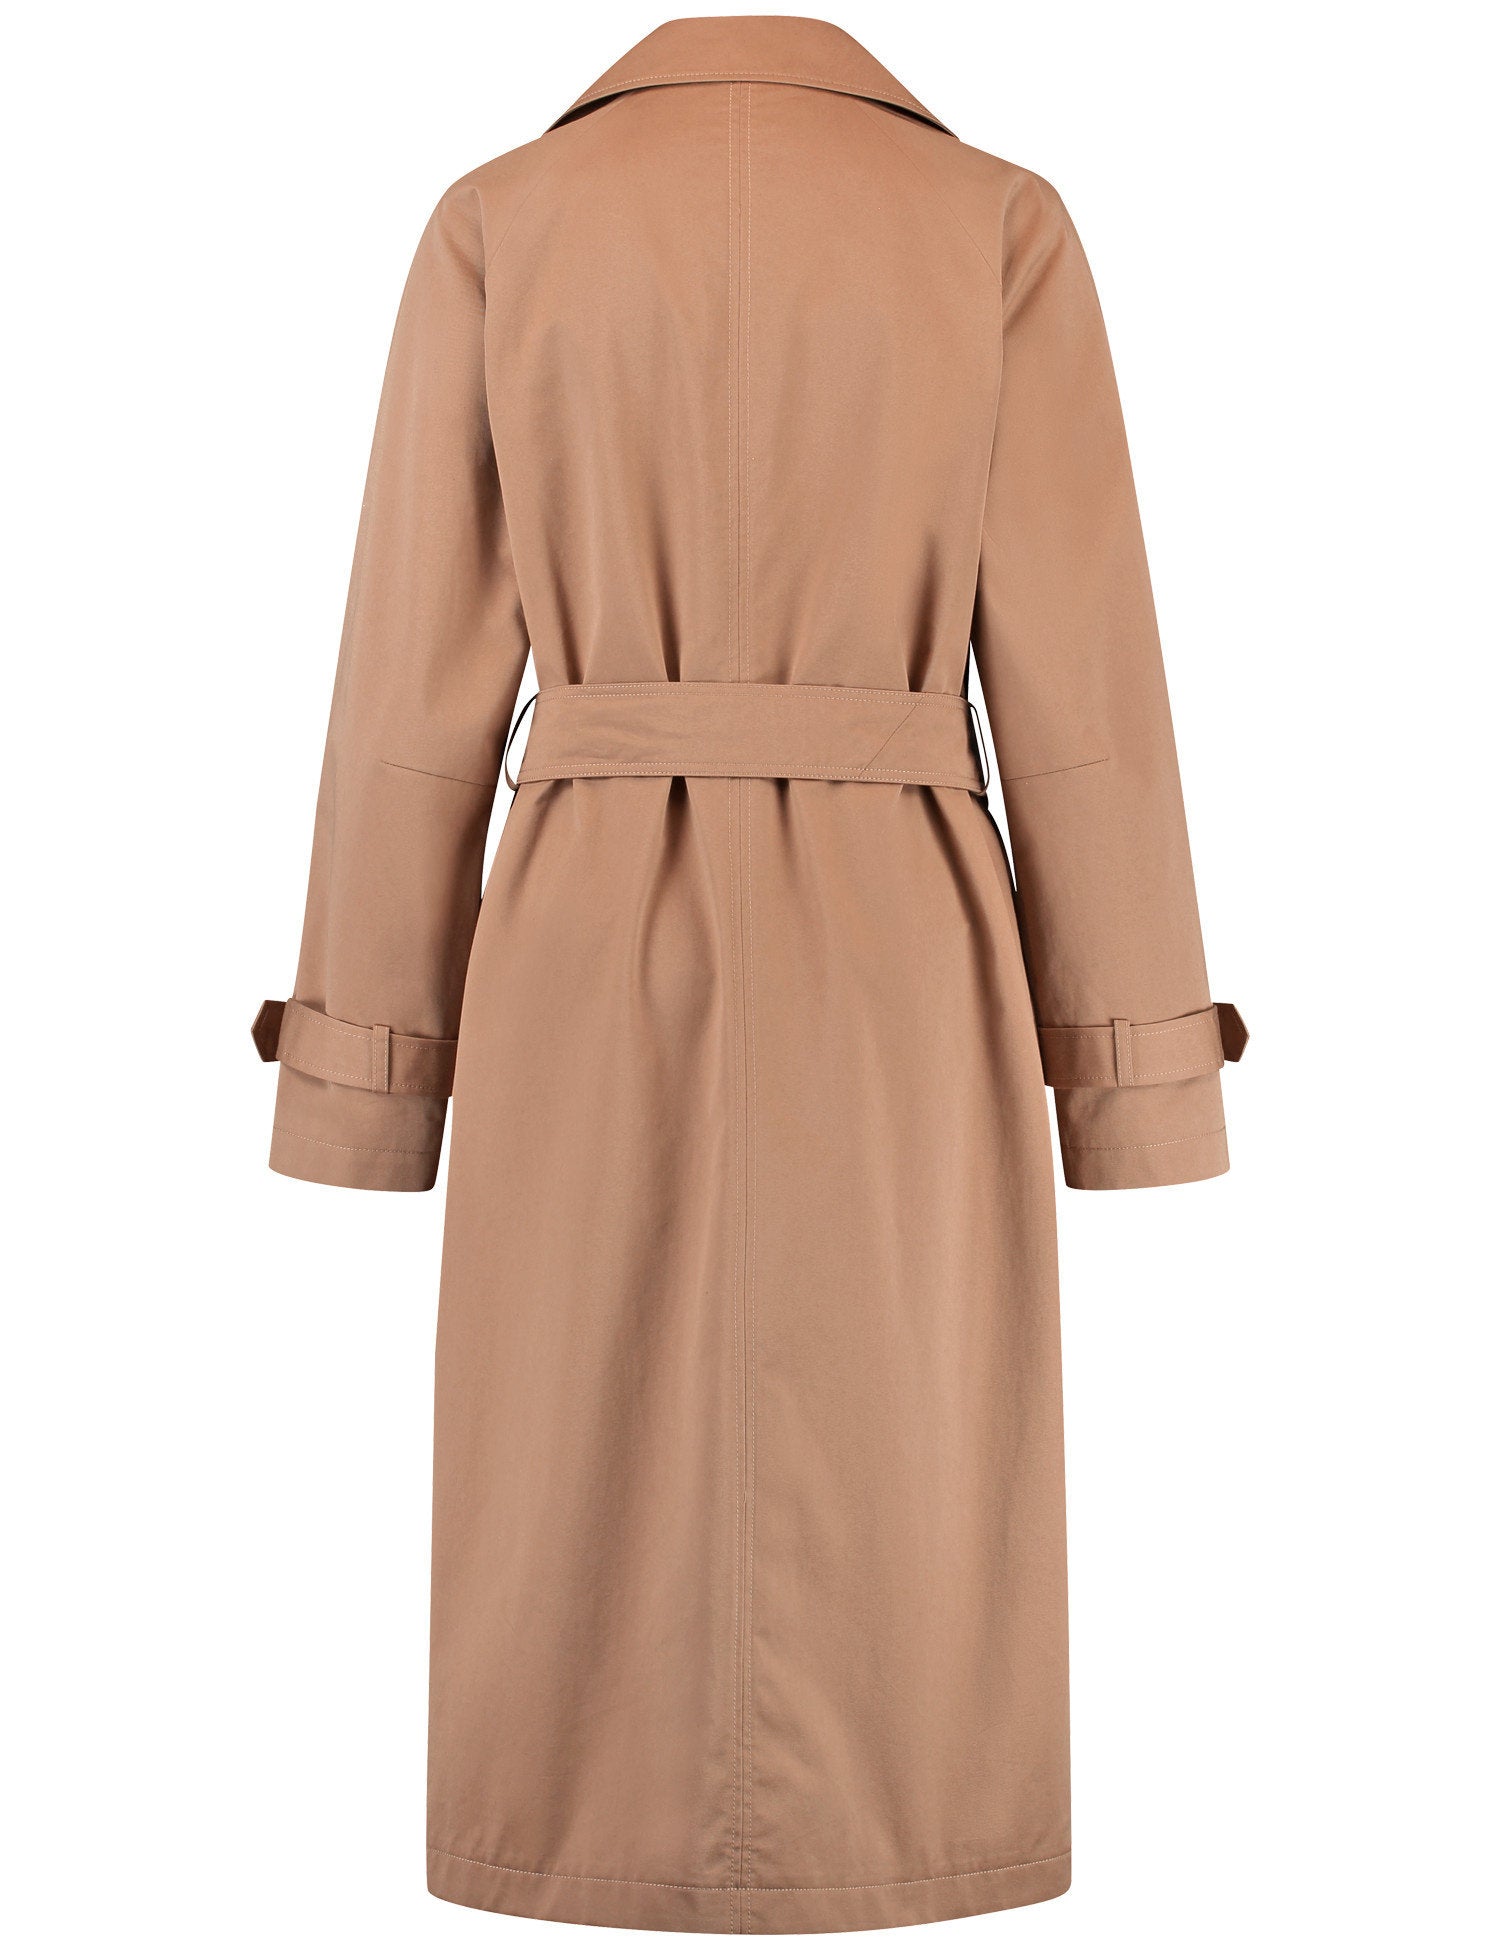 Classic Trench Coat With A Tie-Around Belt_350002-31178_70243_03